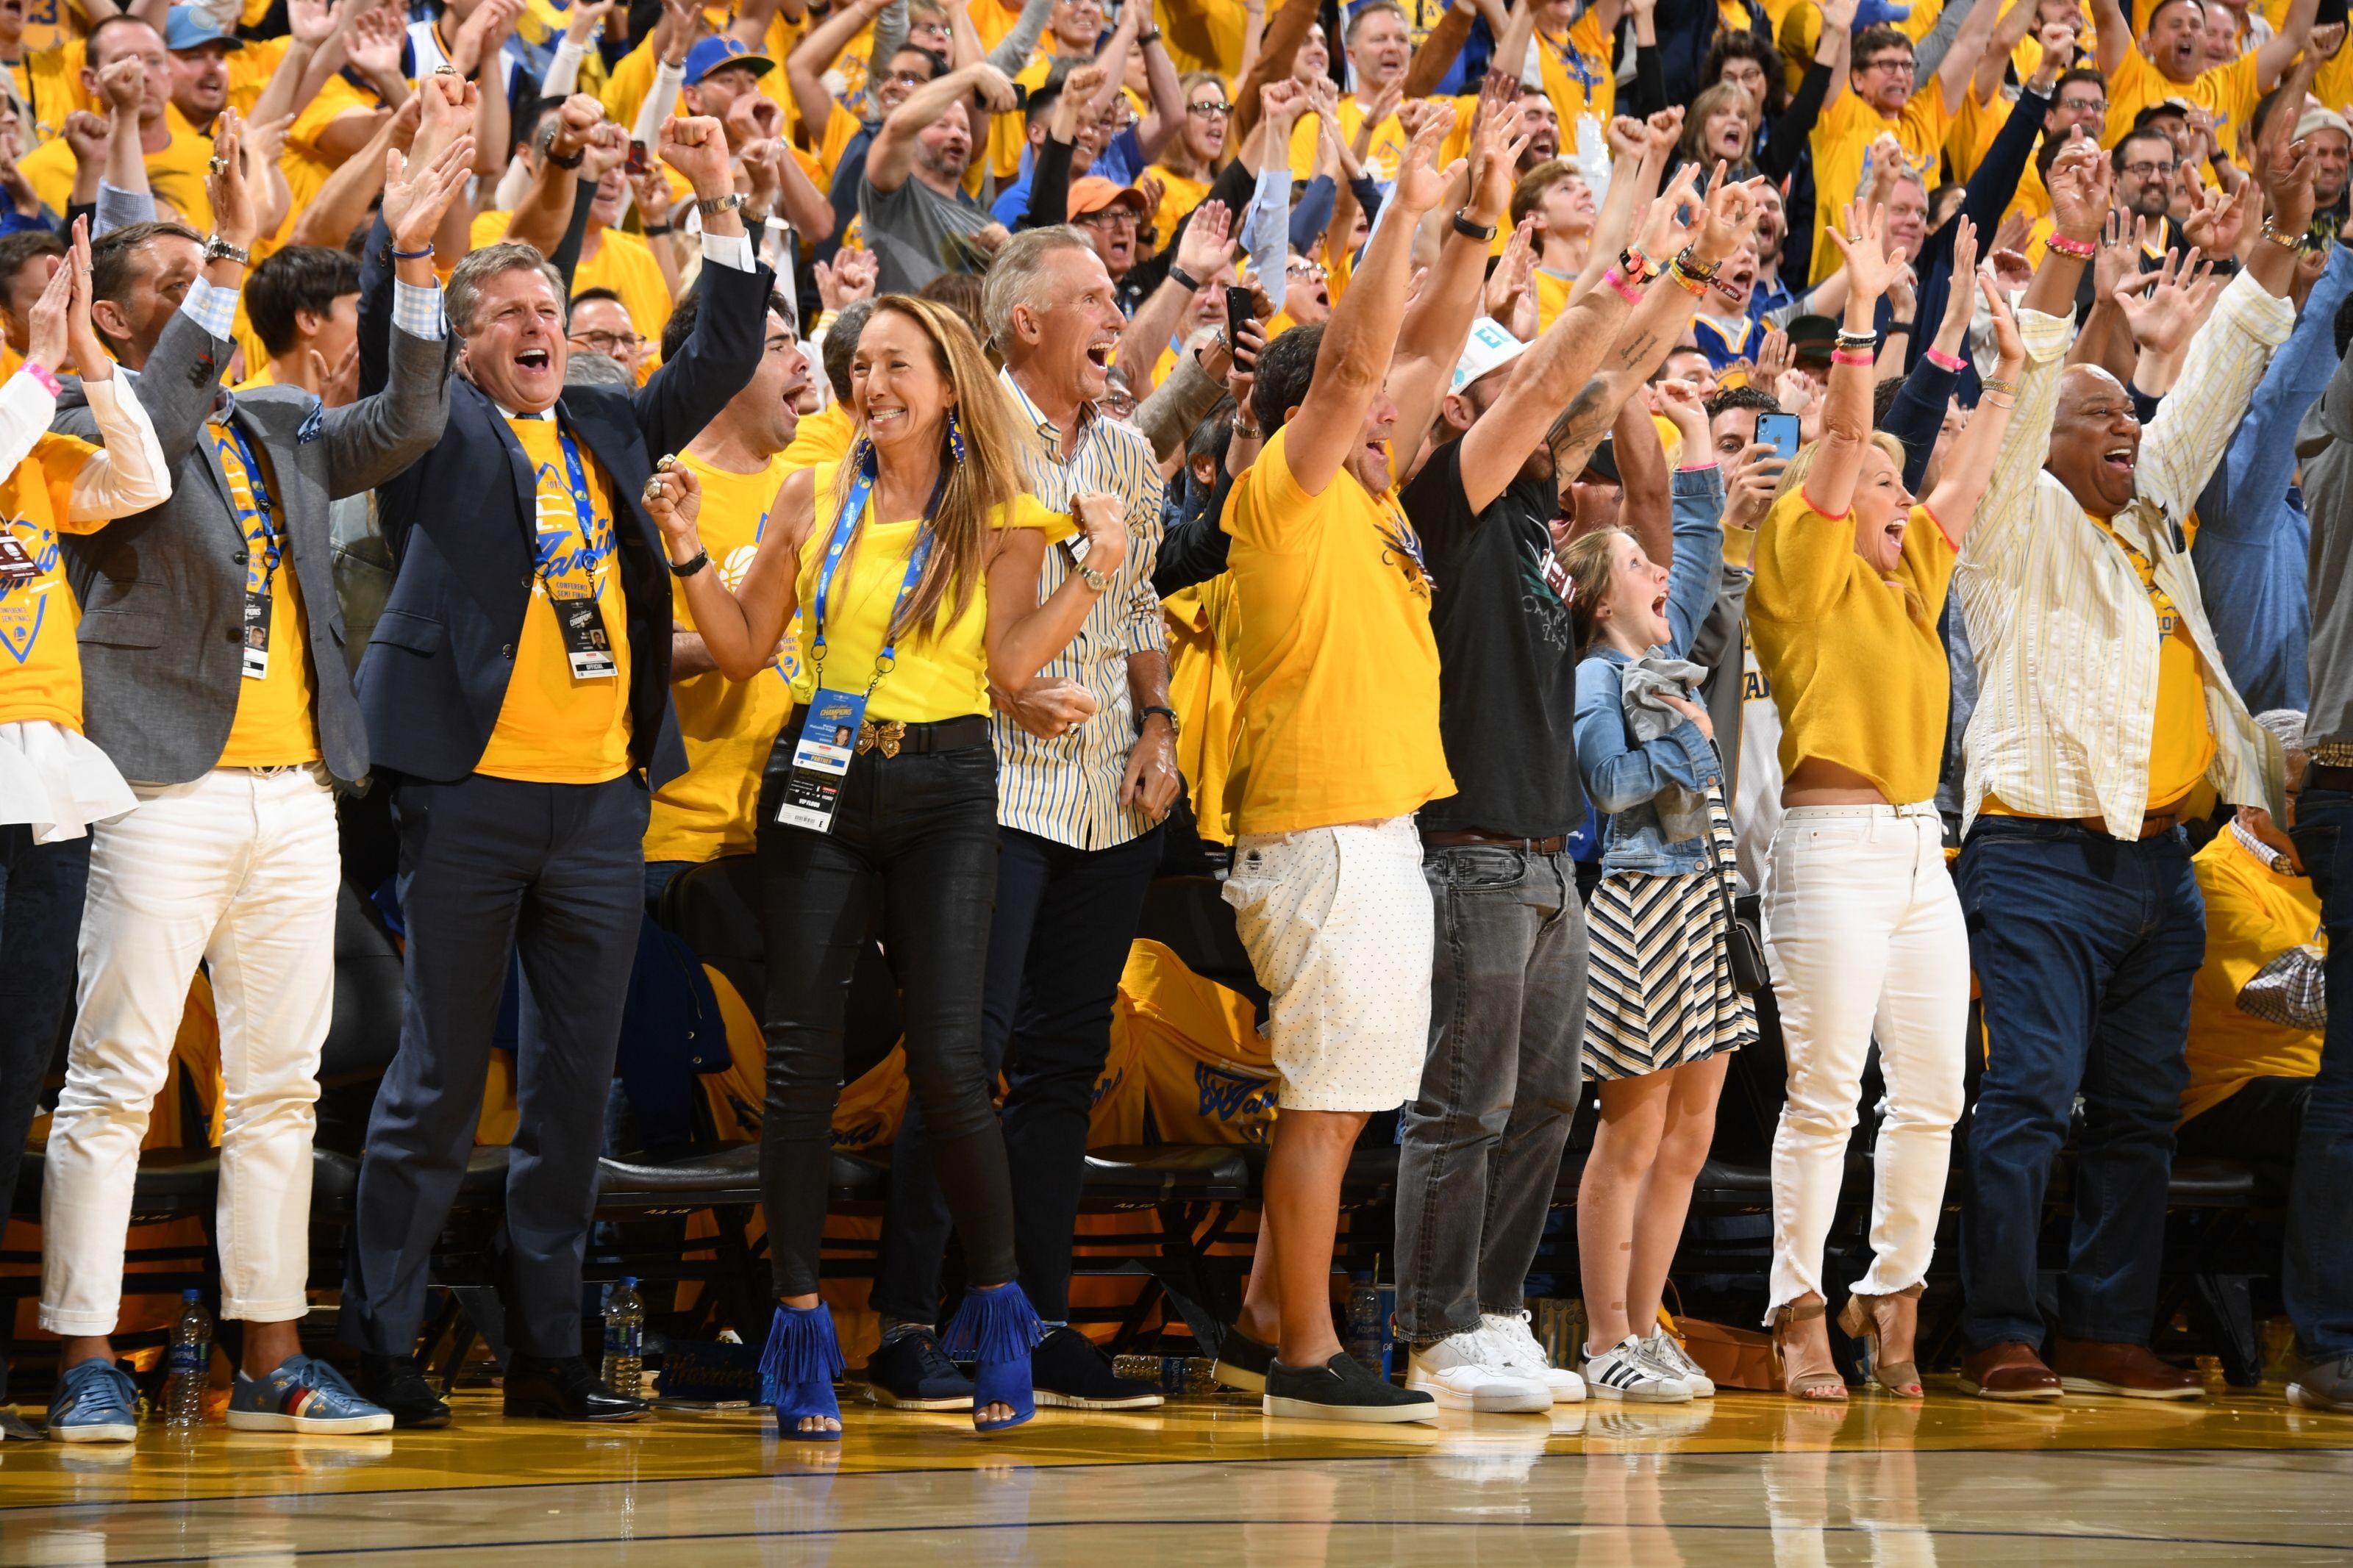 3 Costly mistakes the Golden State Warriors made in Game 1